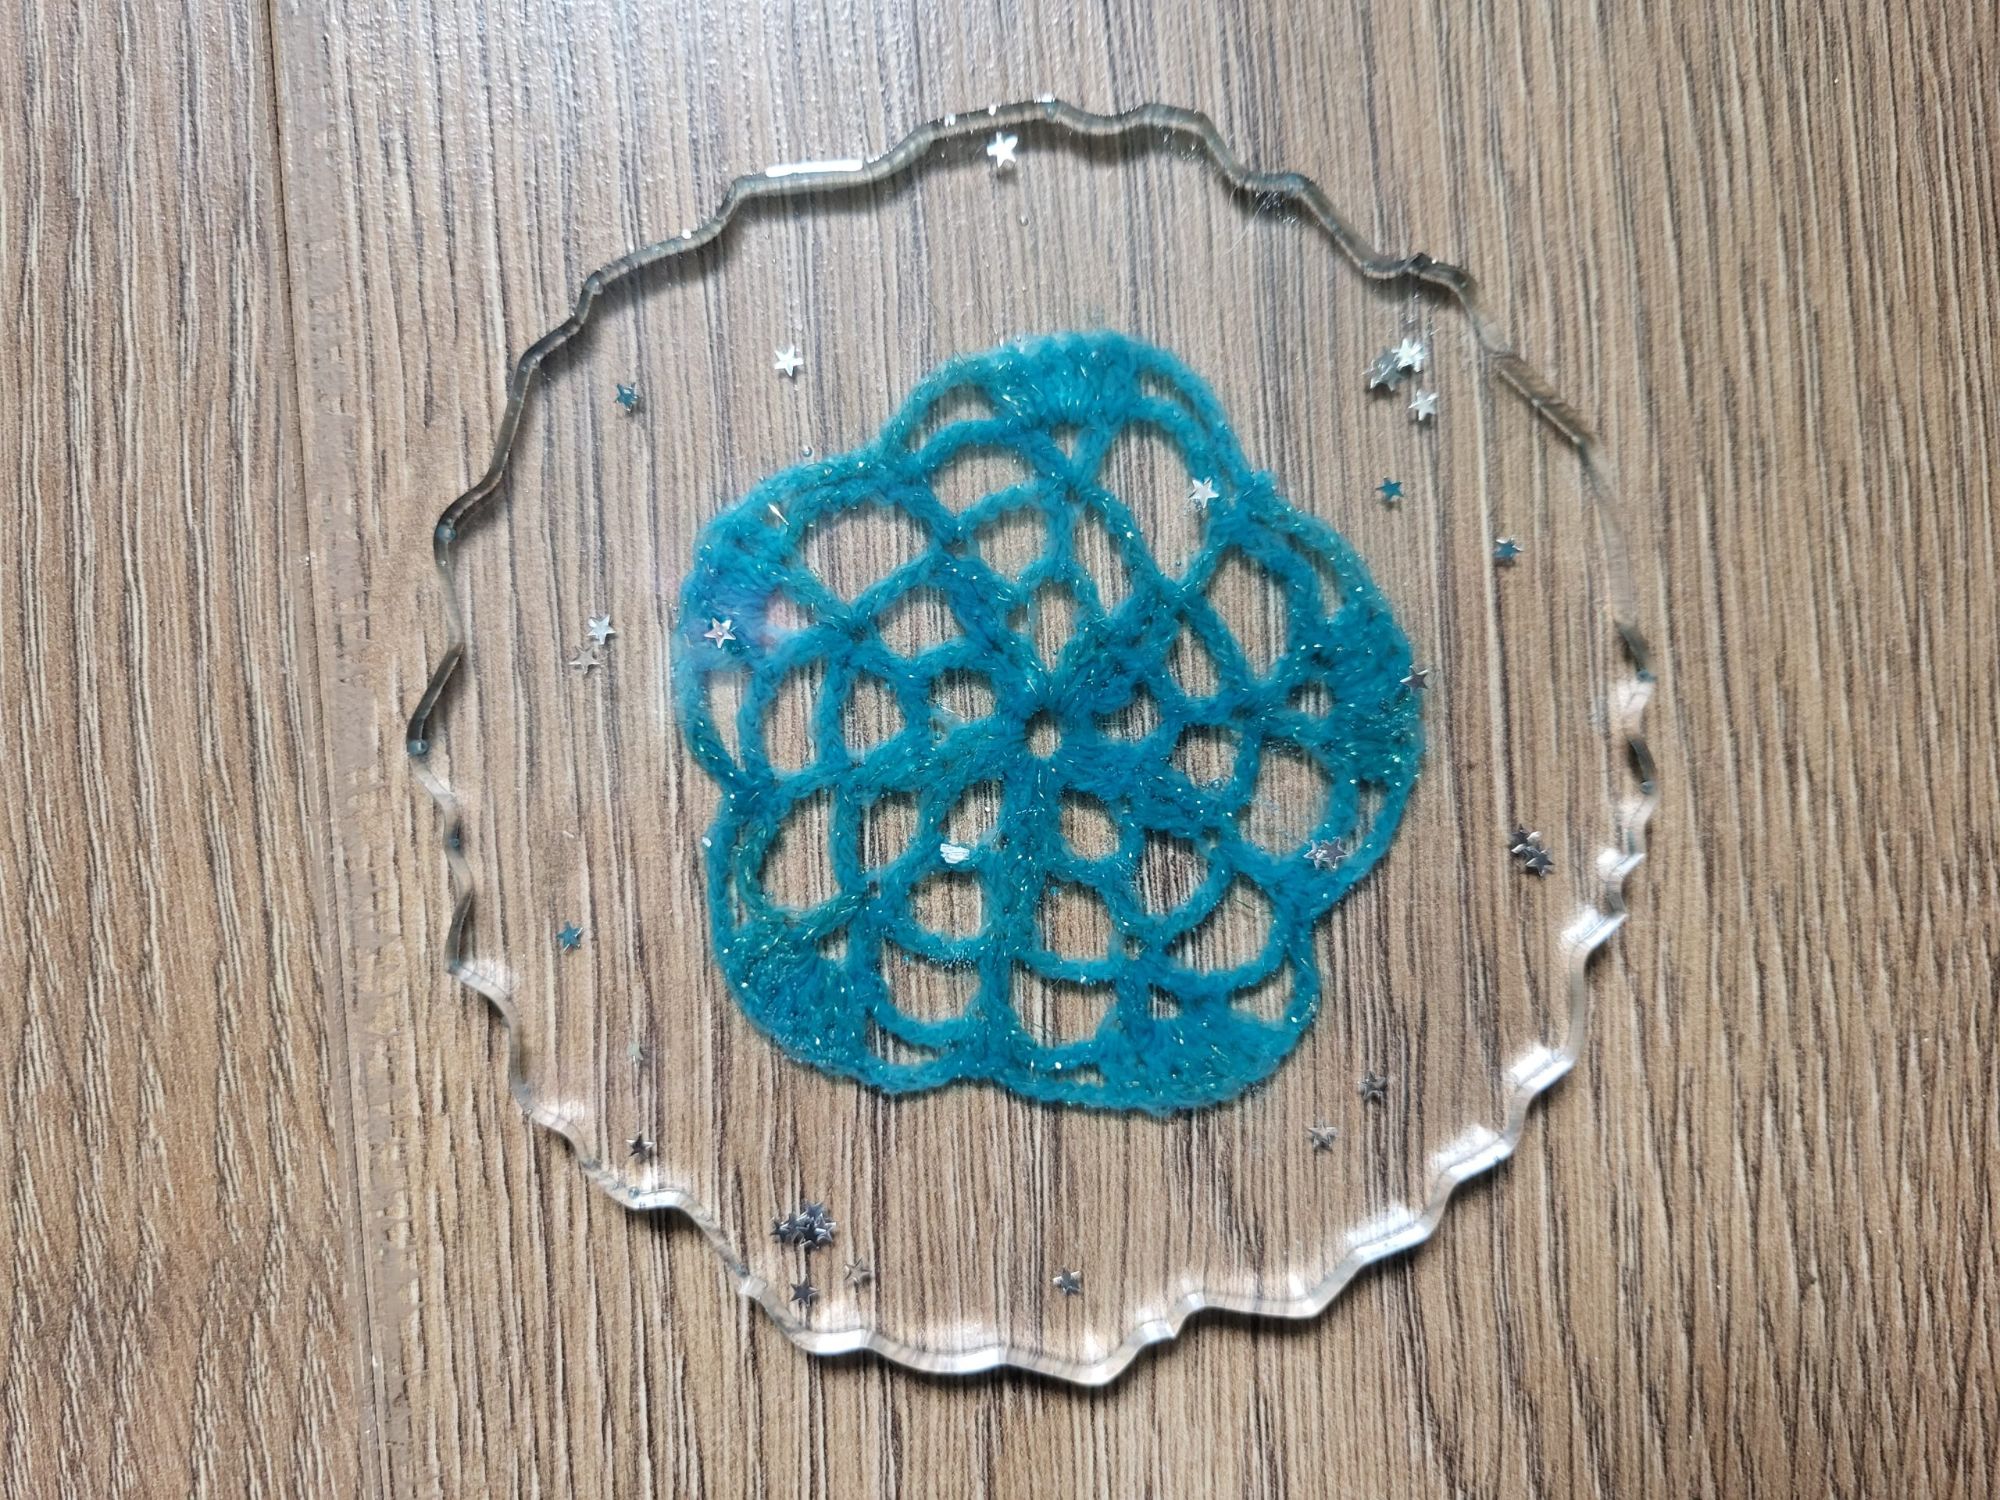 a clear resin coaster sits in the middle of the image with a blue crocheted snoflake captured in it with tiny silver snowflakes also scattered inside the resin